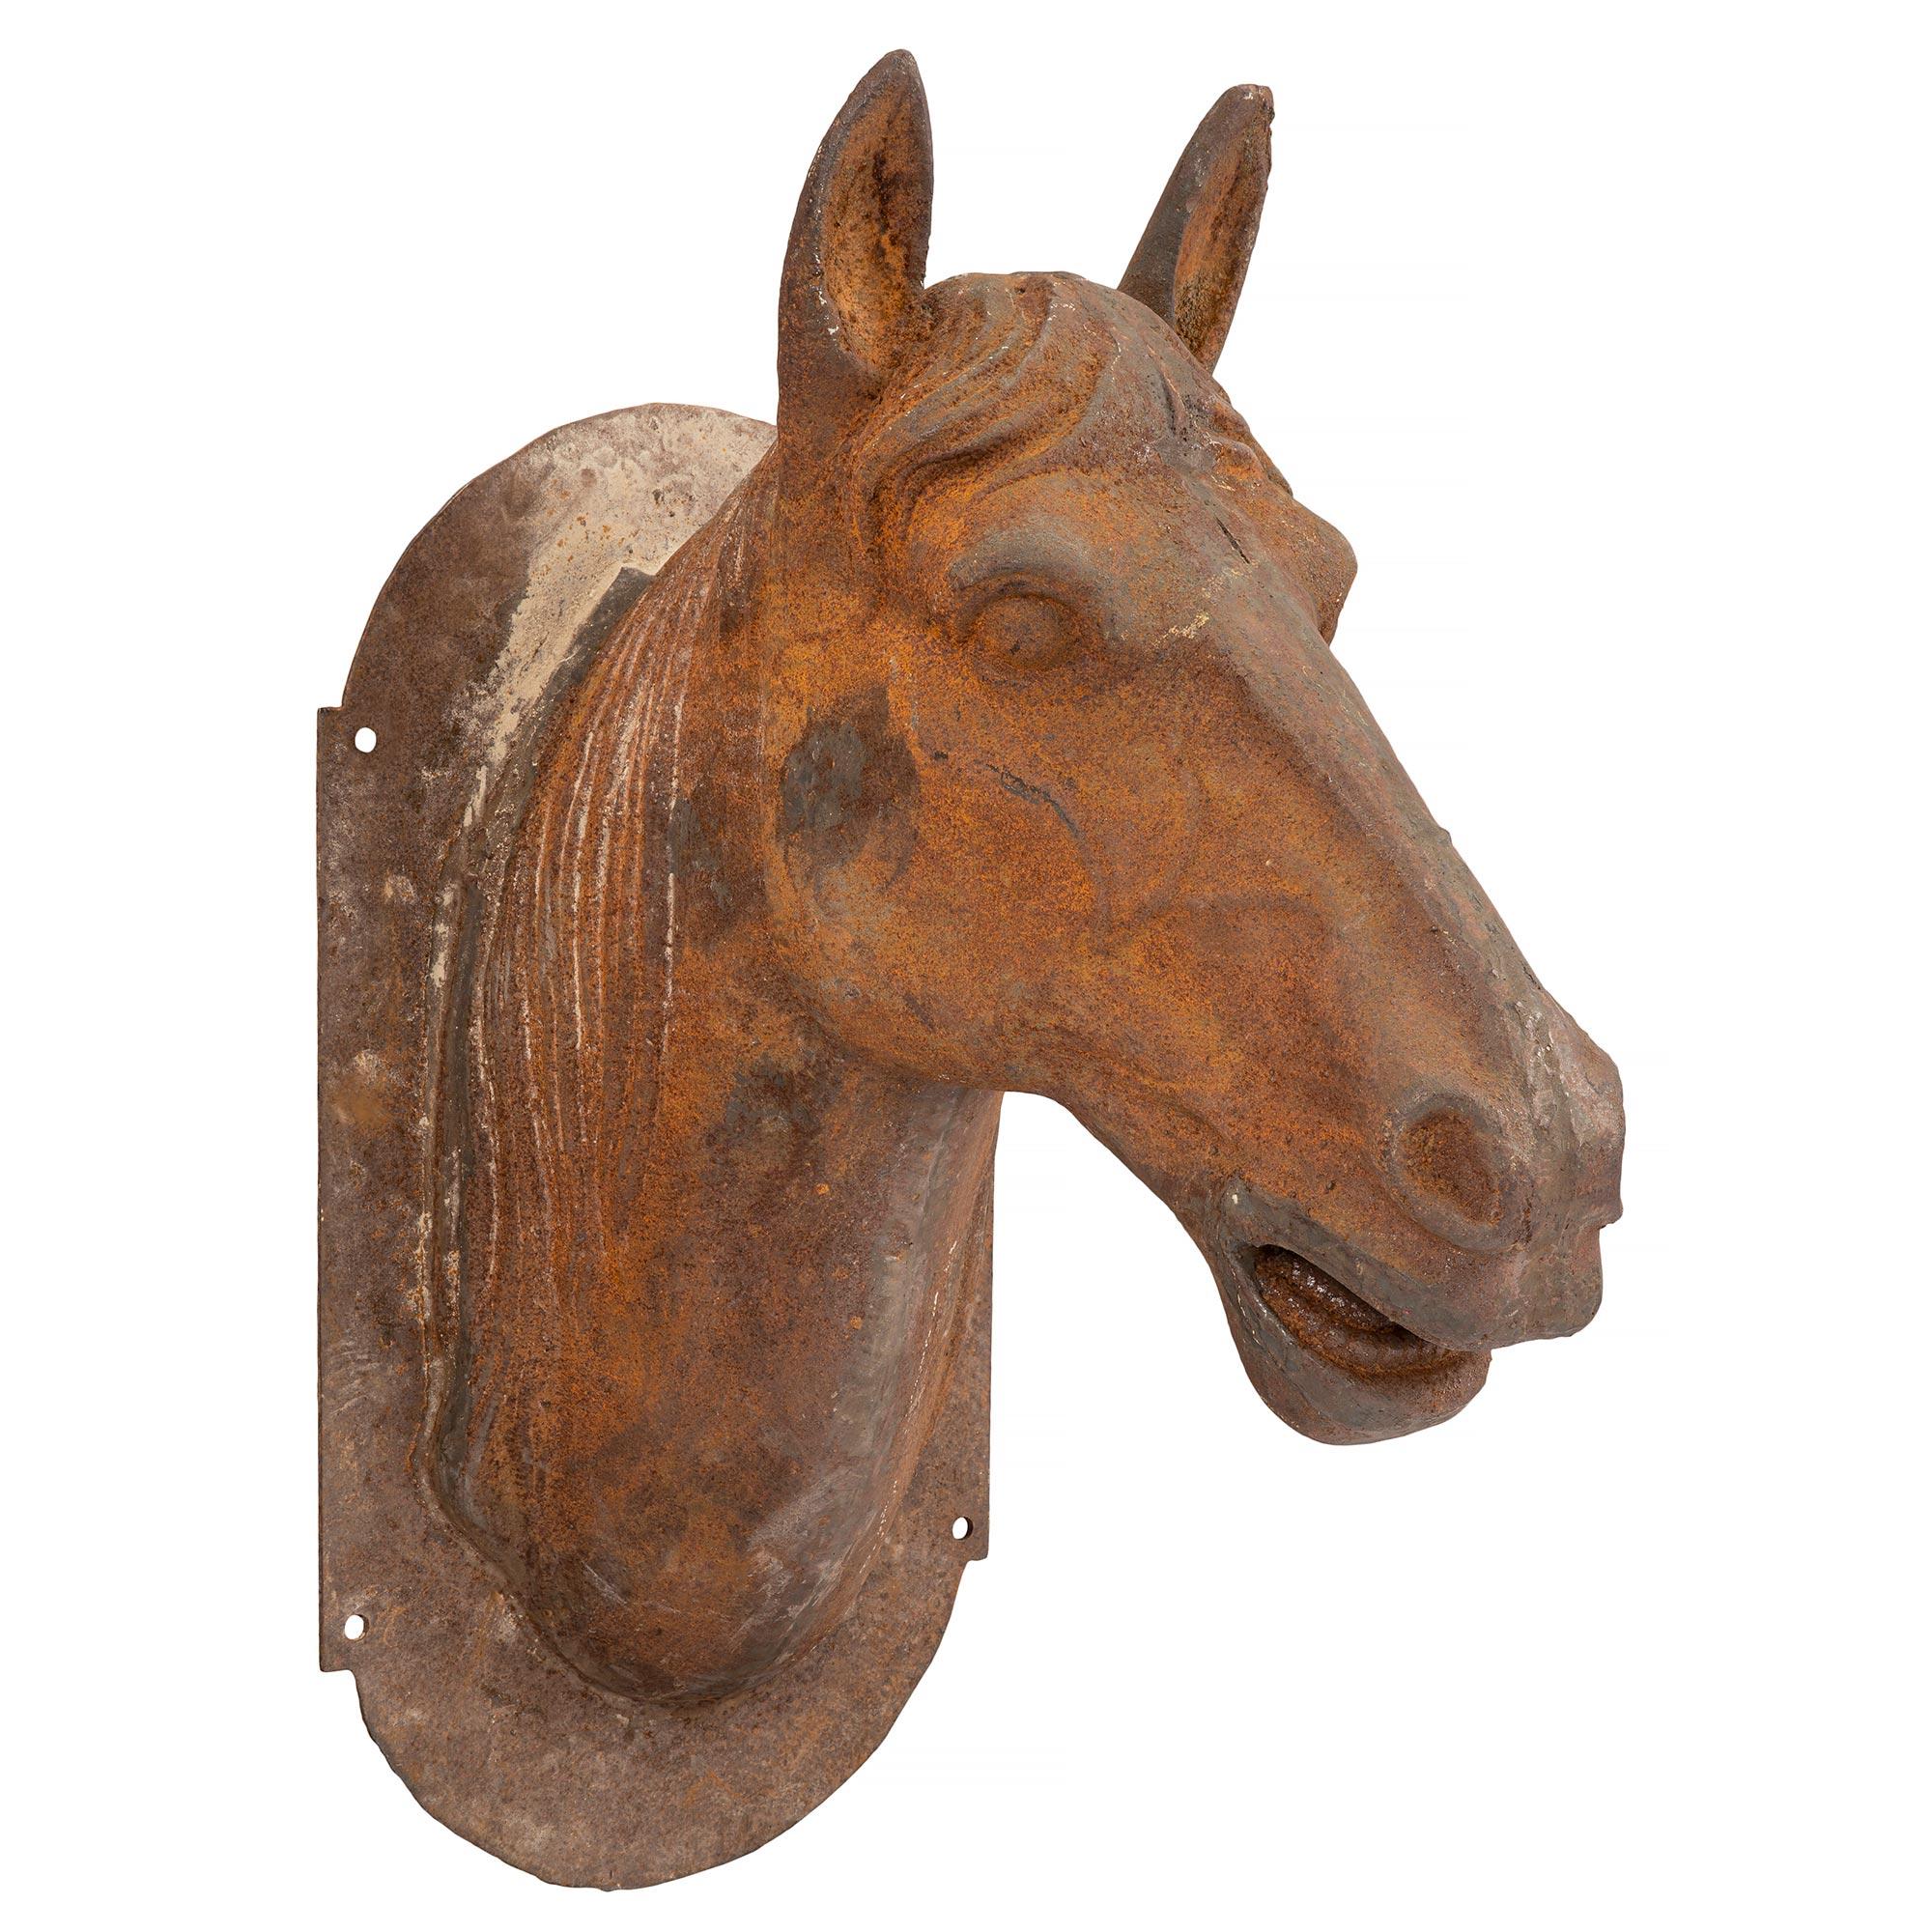 A handsome French late 19th century wall mounted statue of a cast iron horse's head. The statue displays an oblong back plate and lovely intricate detail throughout. All original rich patina.

